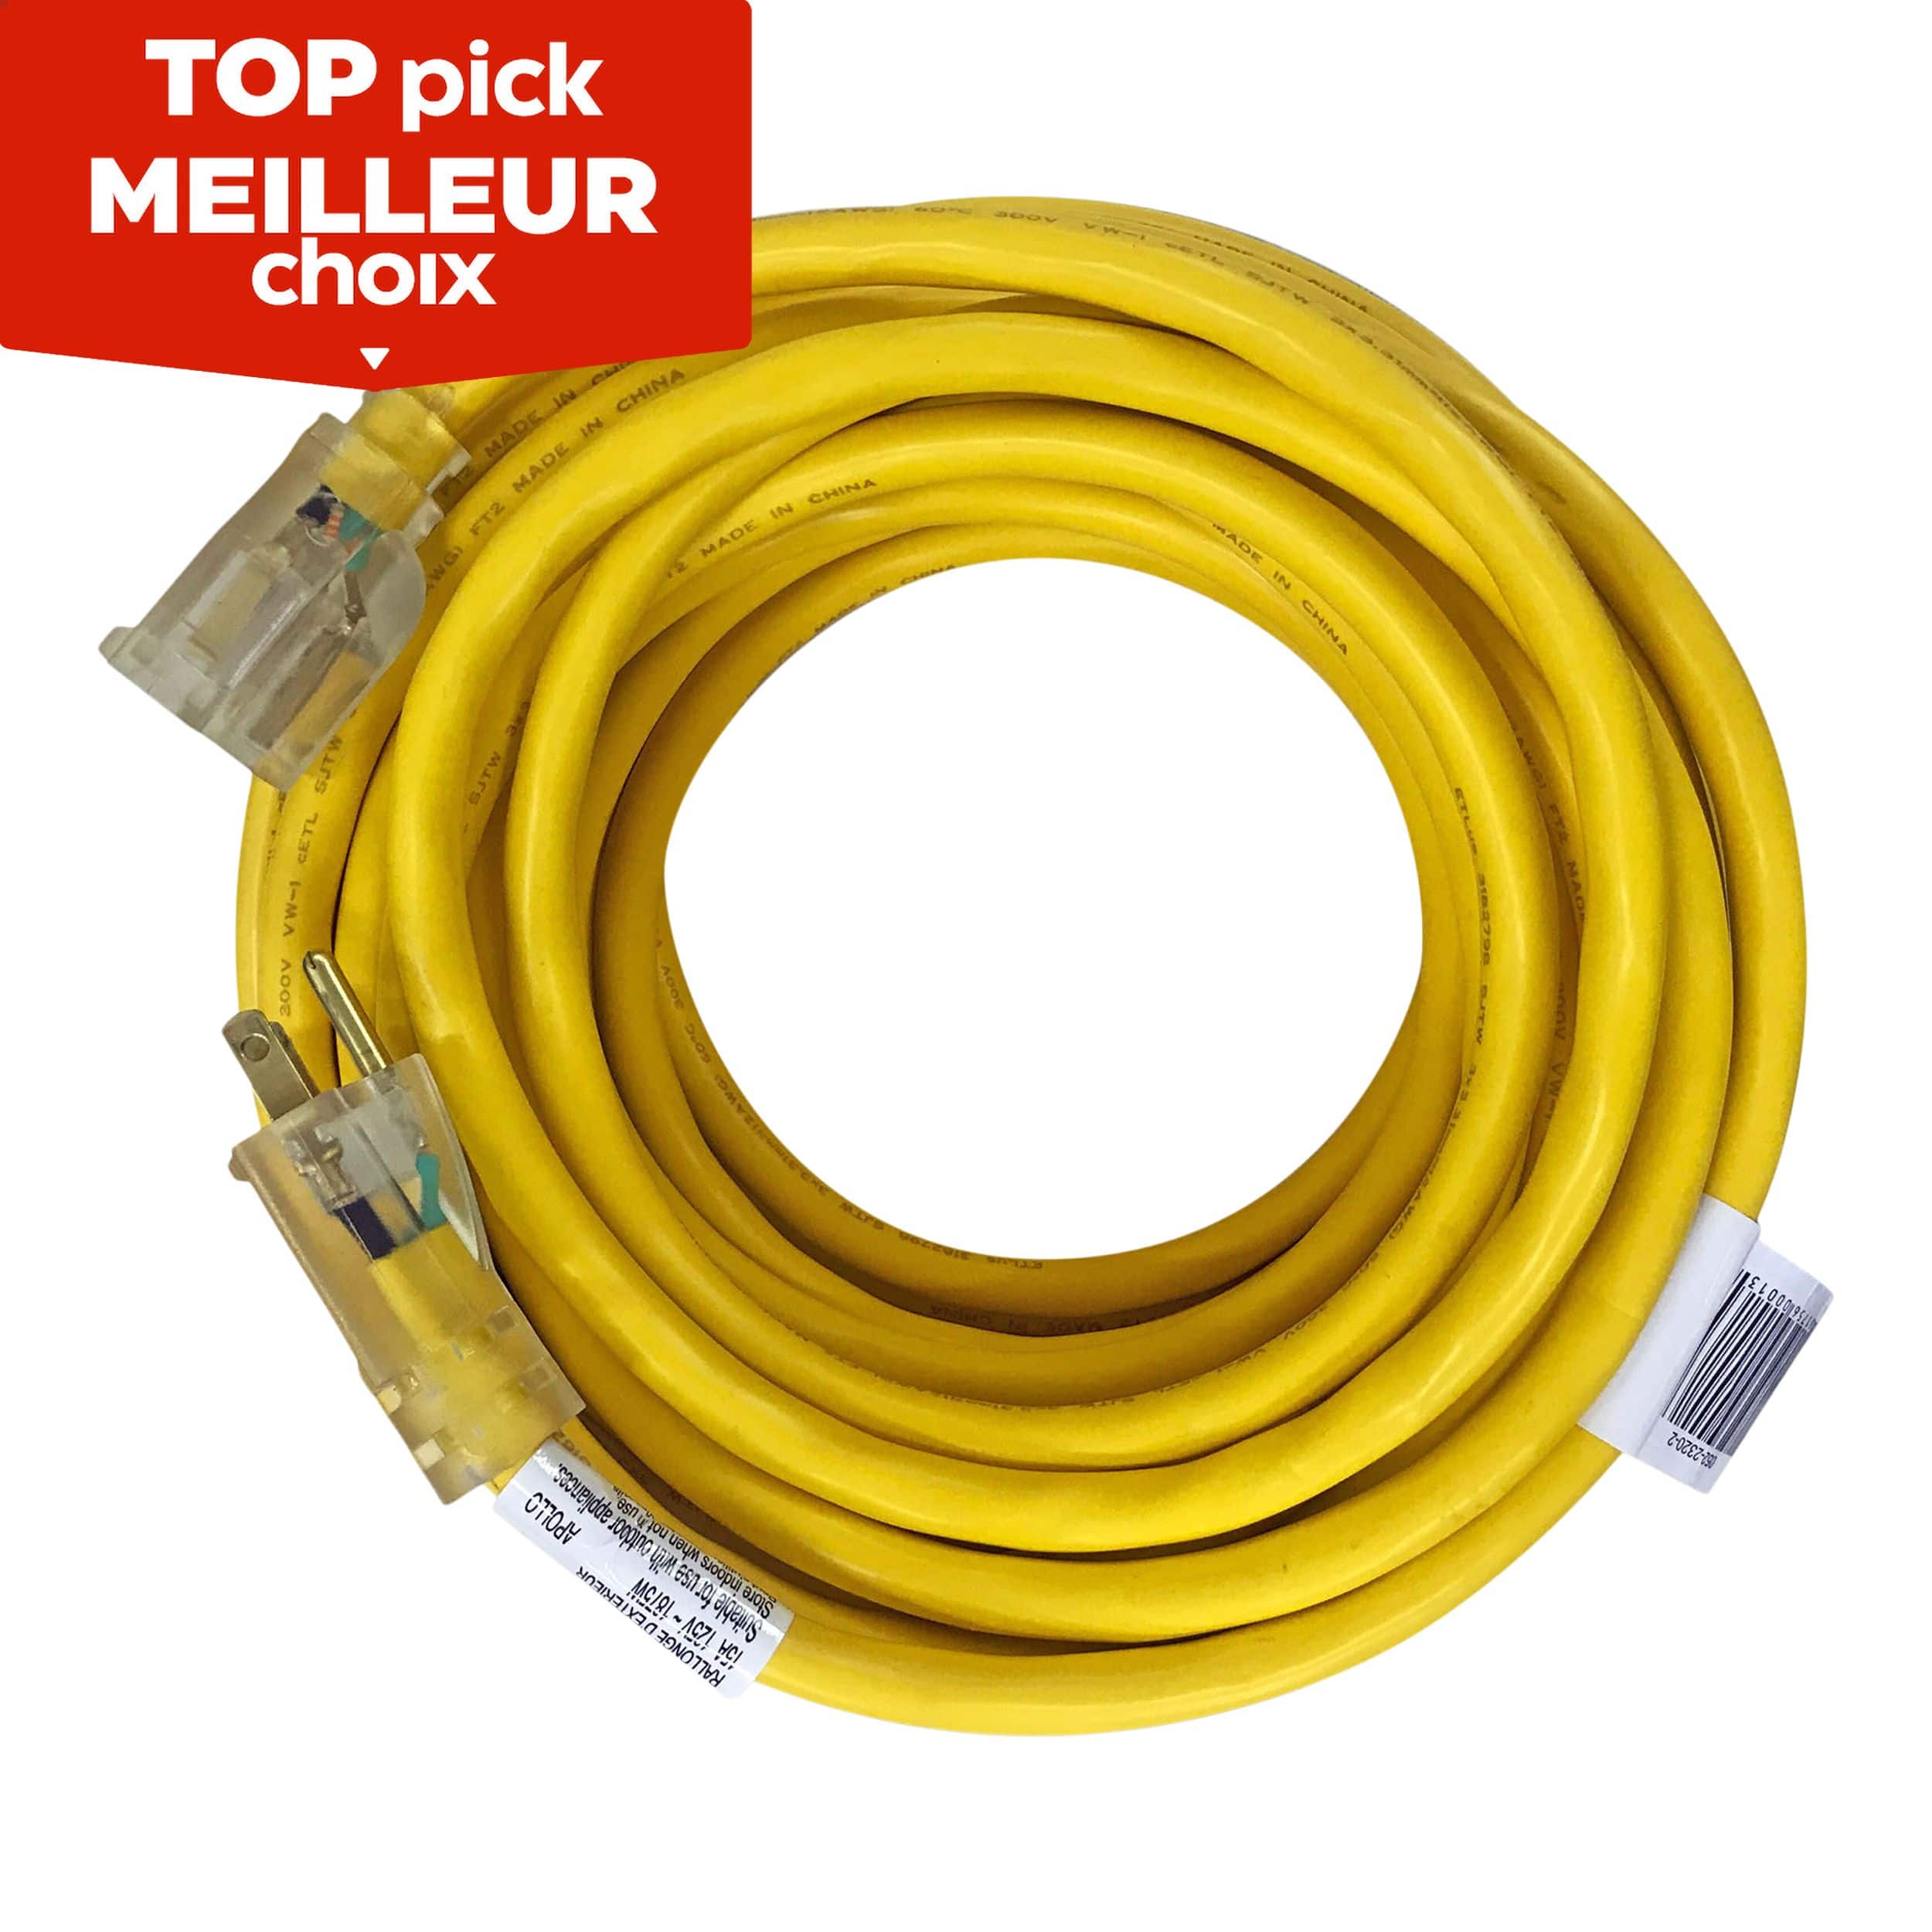 Mastercraft Outdoor Extension Cord with Grounded Outlet and Lighted End,  Yellow Canadian Tire